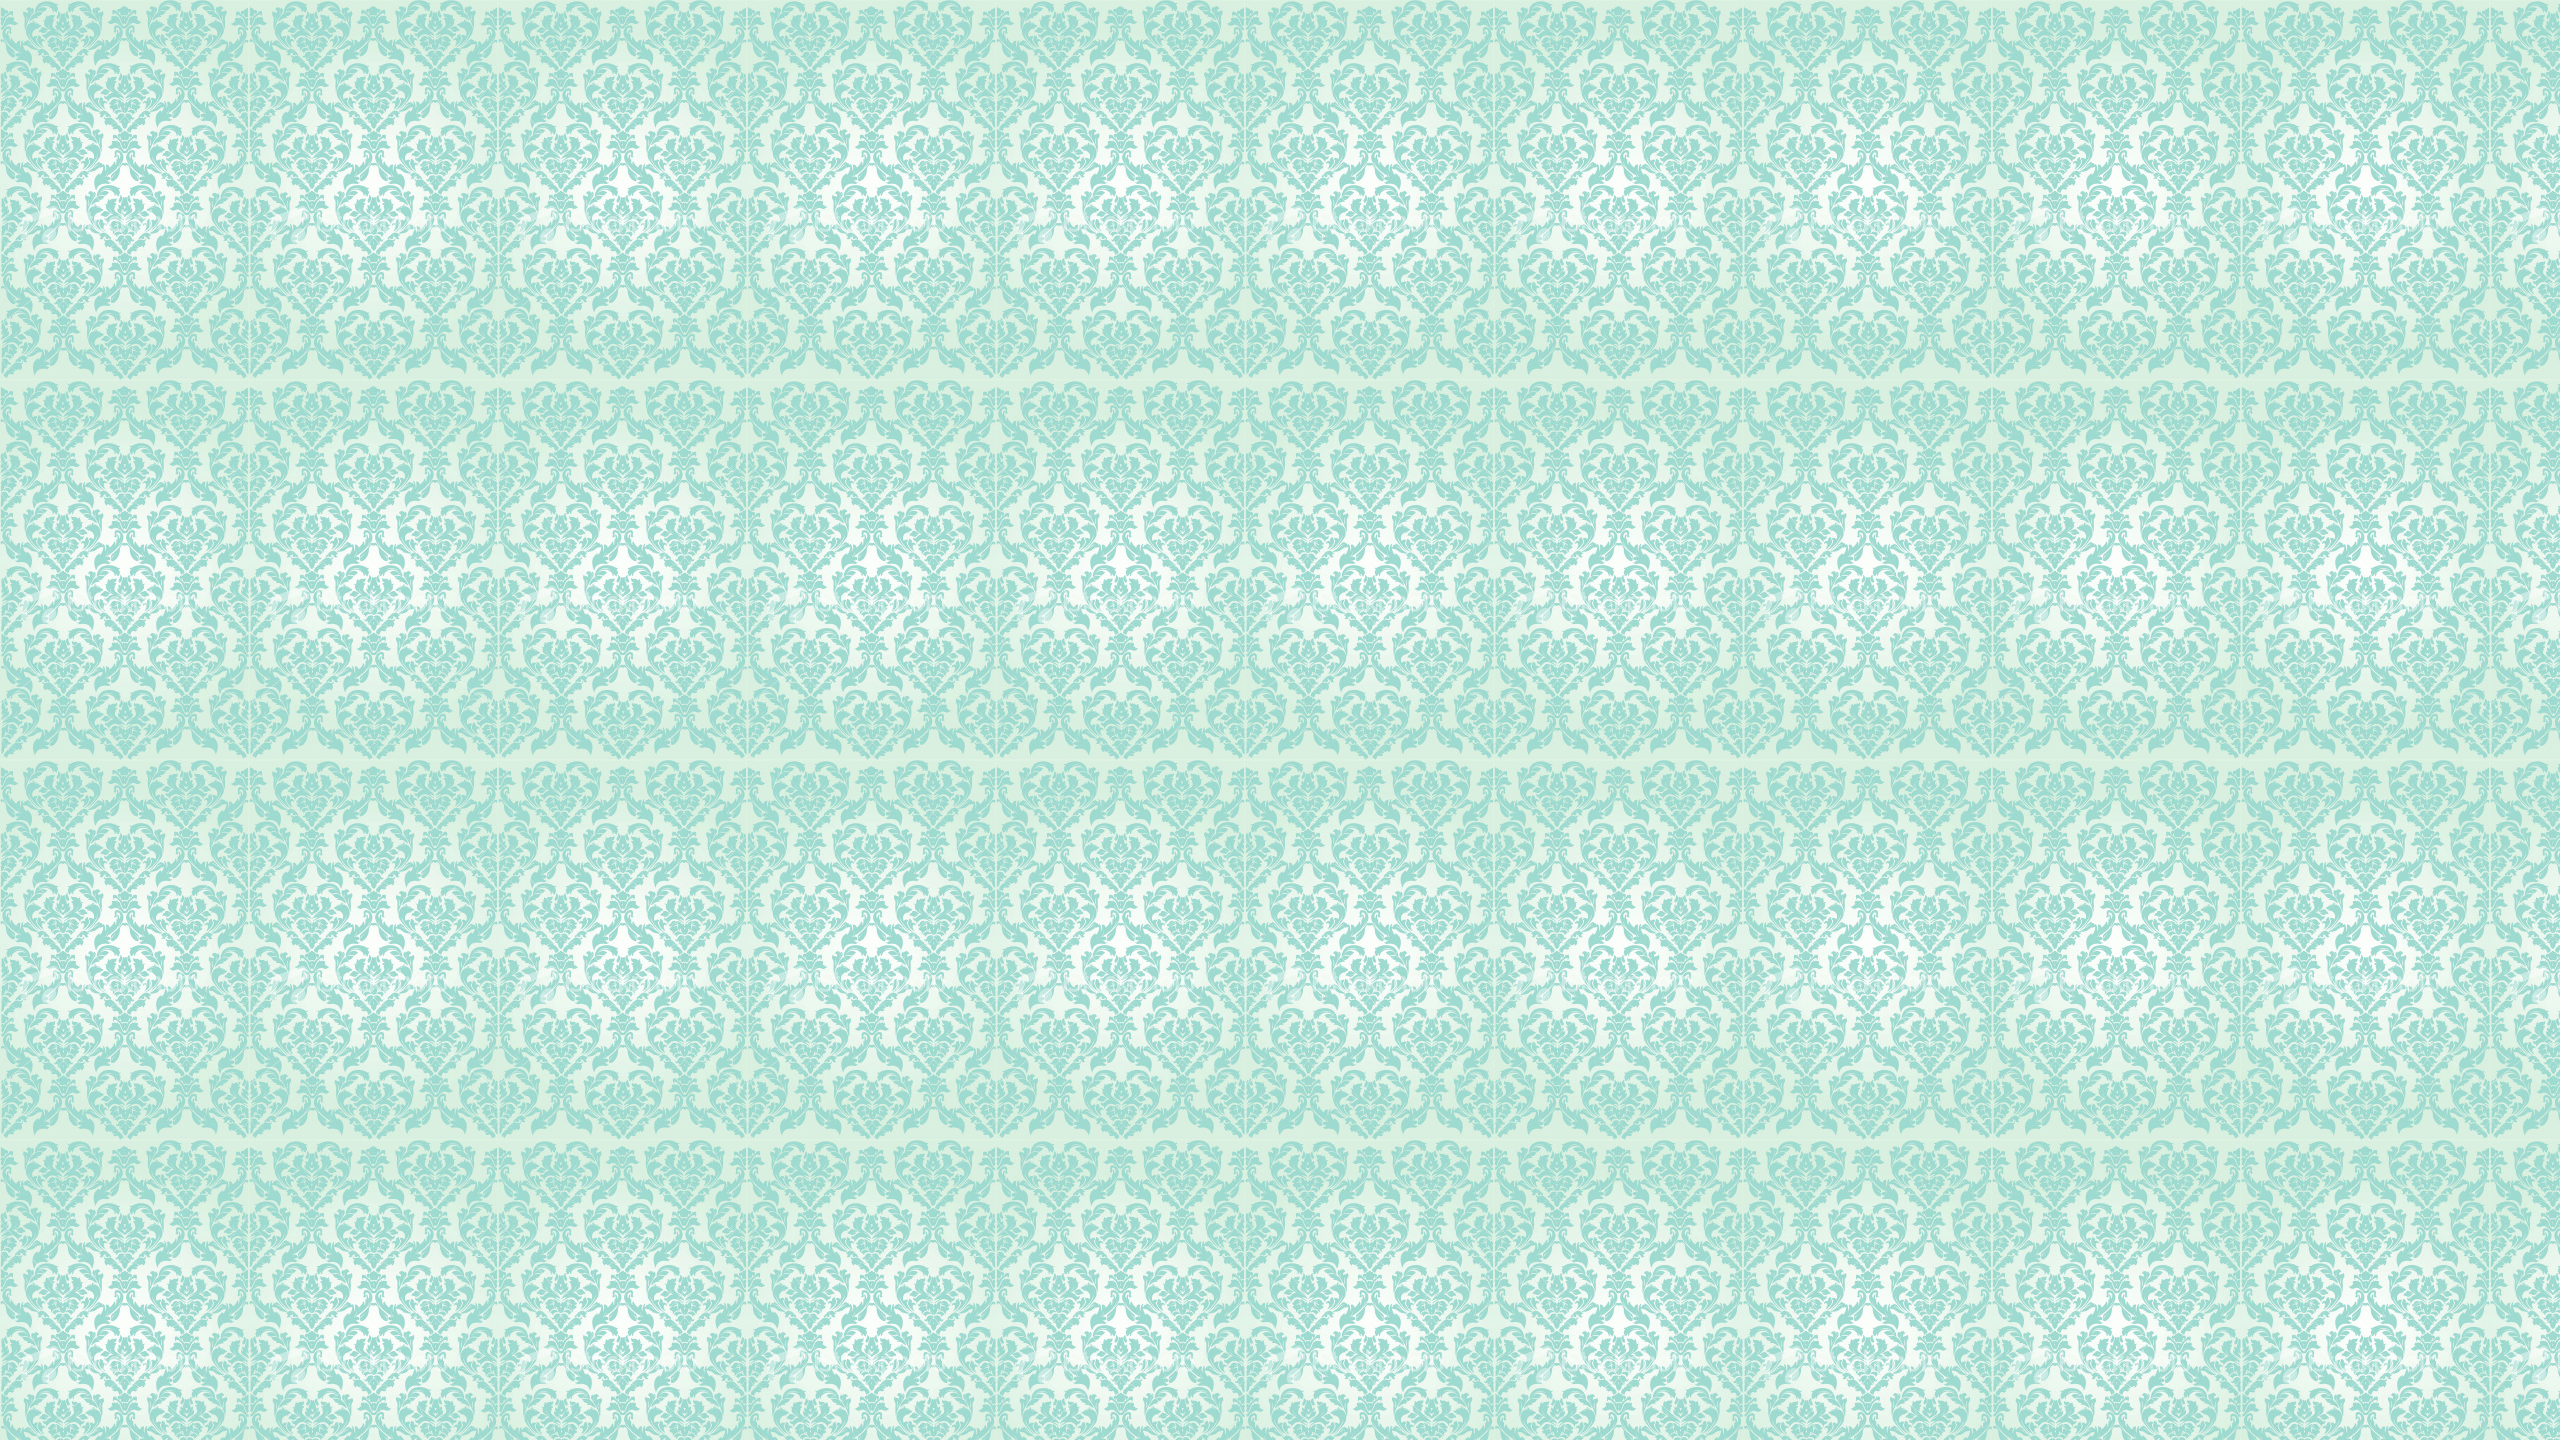 This Teal Baroque Desktop Wallpaper Is Easy Just Save The